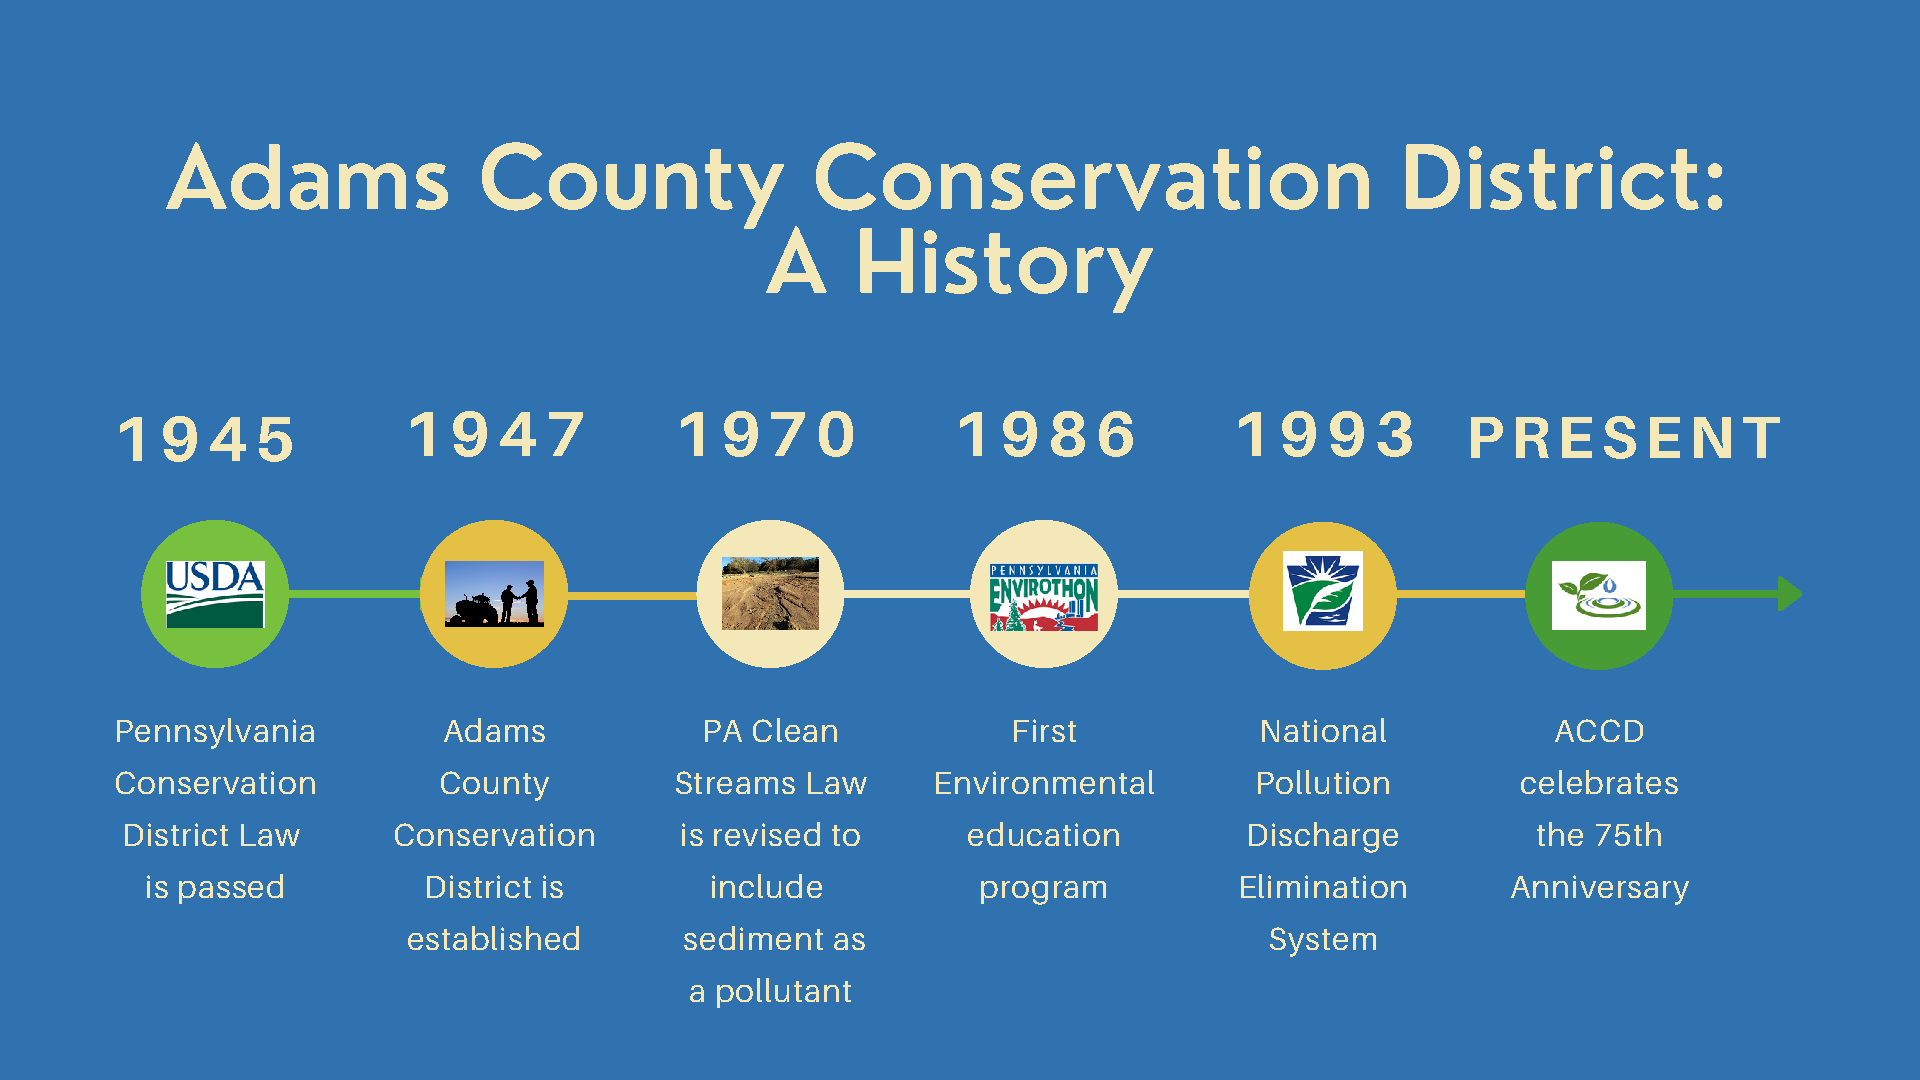 Timeline History of the Conservation District